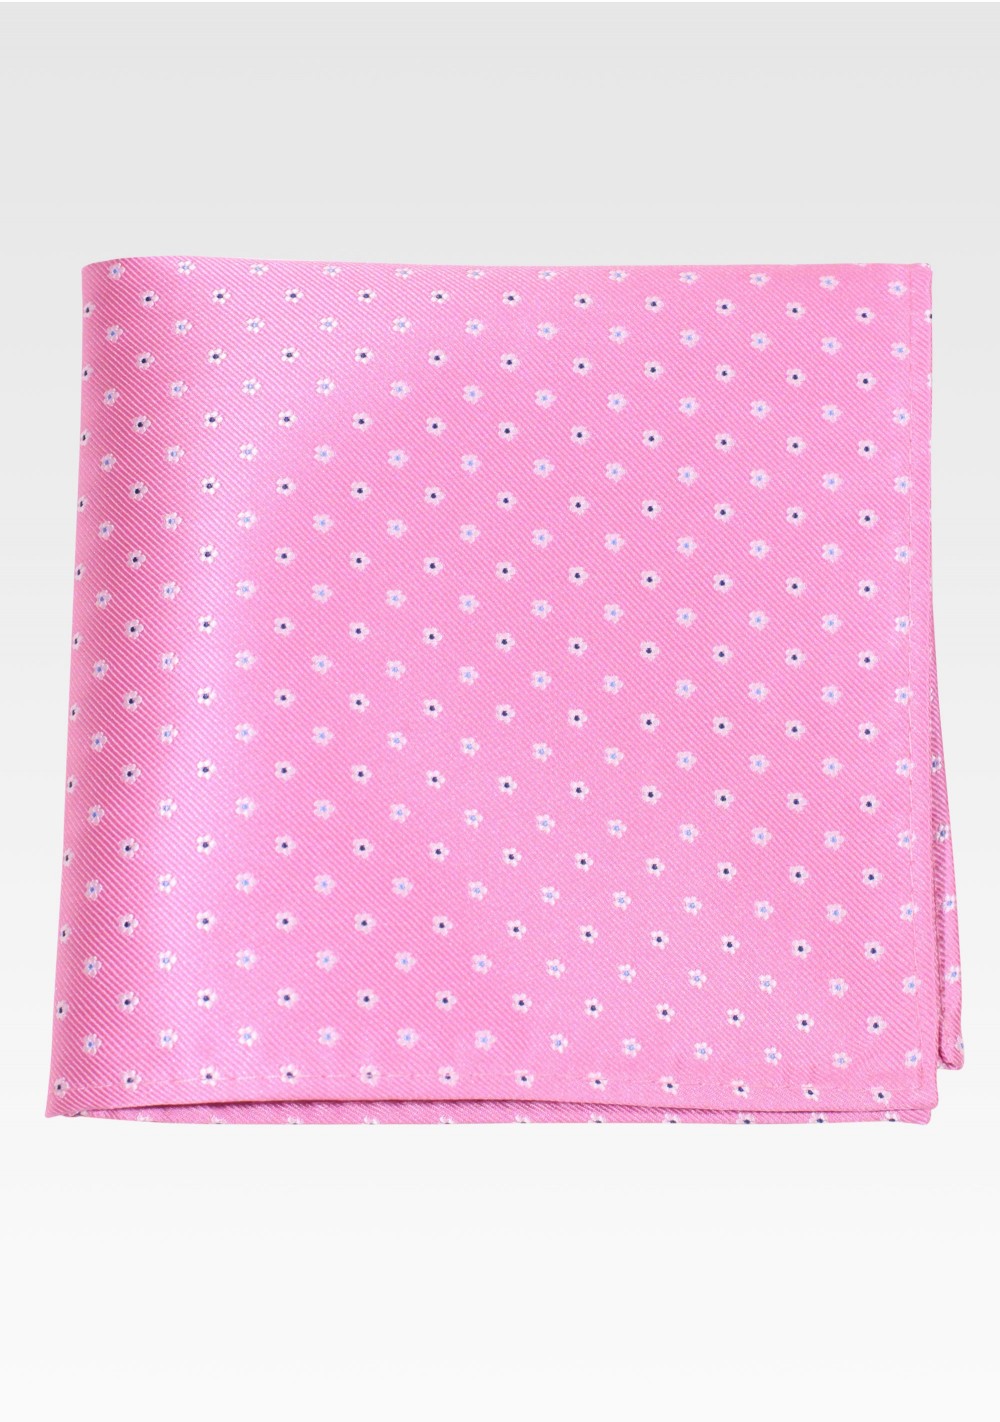 Pink Hanky with Tiny Blue Florals